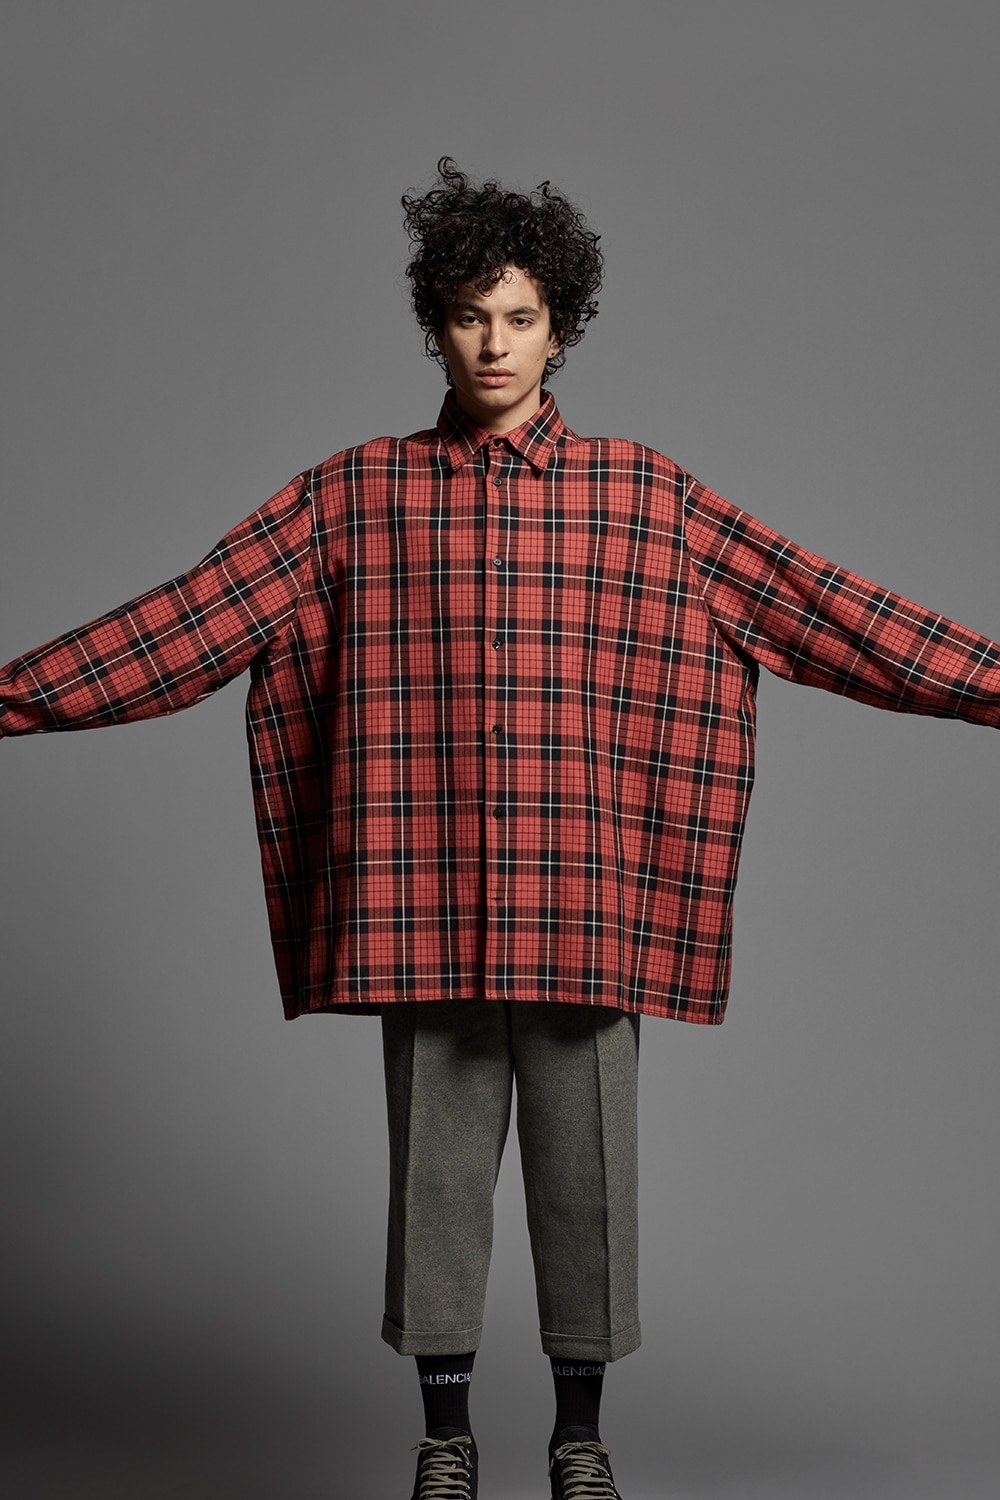 Why Oversized Clothing Is The Next Big Thing | The Journal | MR PORTER